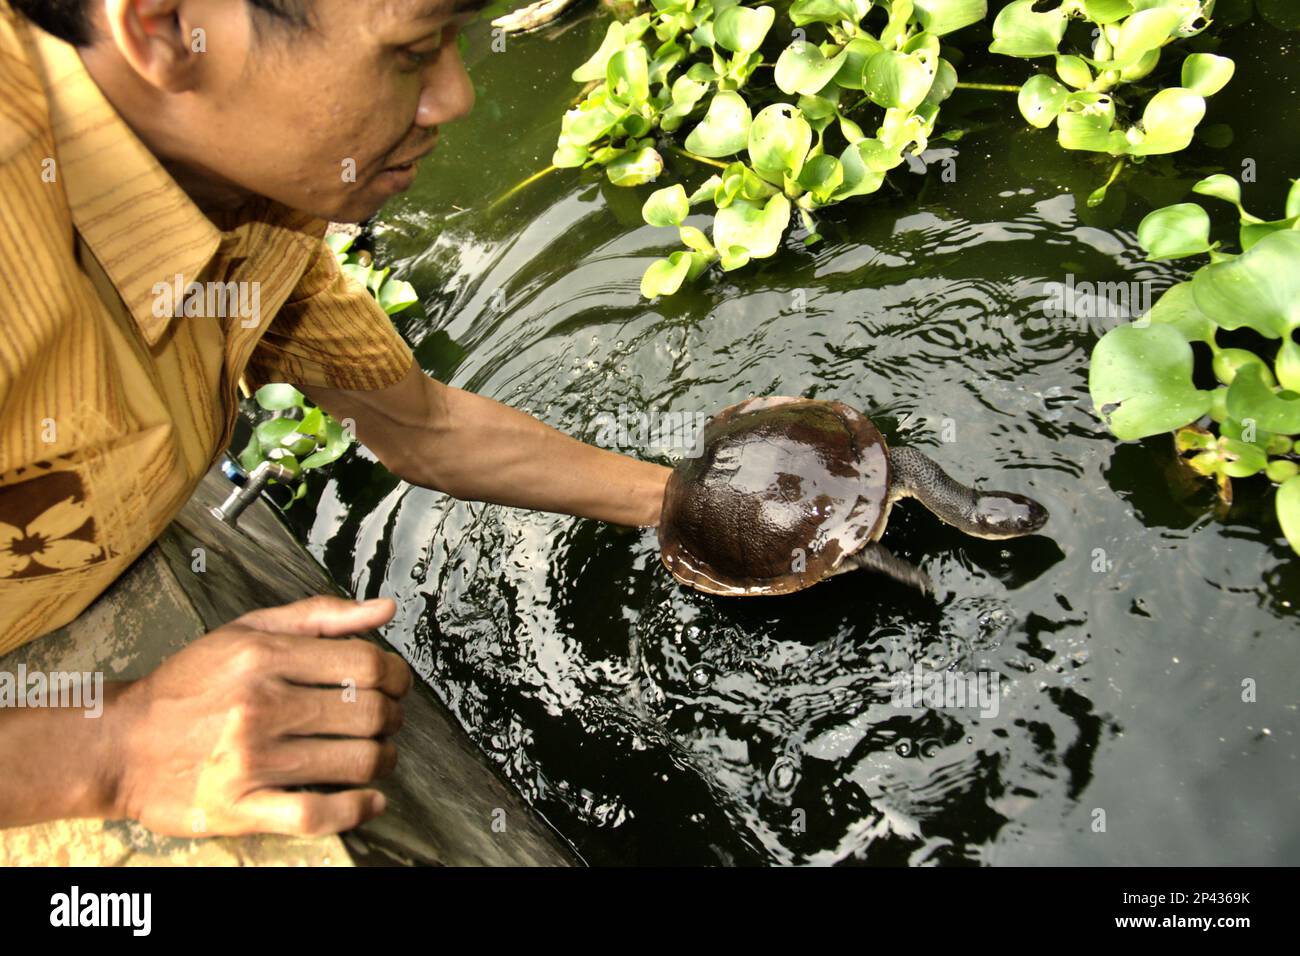 A worker is holding a critically endangered Rote Island's endemic snake-necked turtle (Chelodina mccordi) at a licensed ex-situ breeding farm in Jakarta, Indonesia. Scientific research suggests that reptile richness is likely to decrease significantly across most parts of the world with ongoing future climate change. 'Together with other anthropogenic impacts, such as habitat loss and harvesting of species, this is a cause for concern,' wrote a team of scientists led by Matthias Biber (Department for Life Science Systems, School of Life Sciences, Technical University of Munich, Freising). Stock Photo